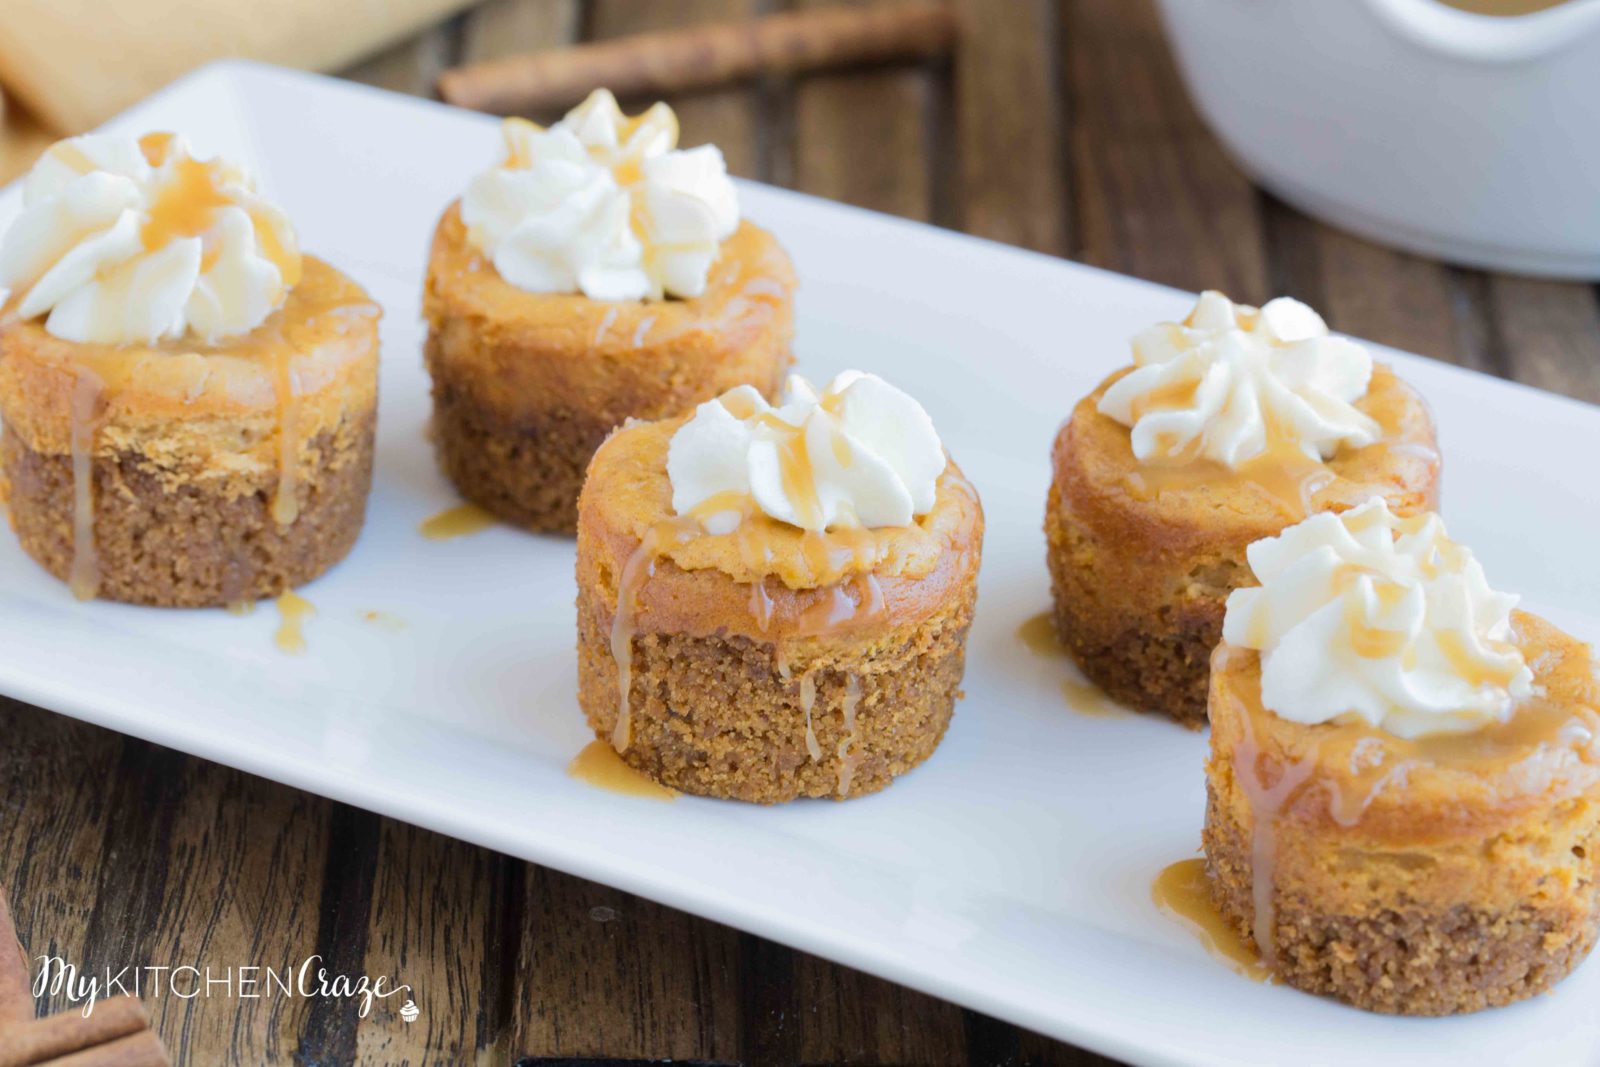 Mini Pumpkin Cheesecakes are the perfect fall dessert! Creamy cheesecake has the perfect hint of pumpkin, topped with homemade whipped cream and caramel sauce. It doesn't get much better than these cute mini cheesecakes this season!